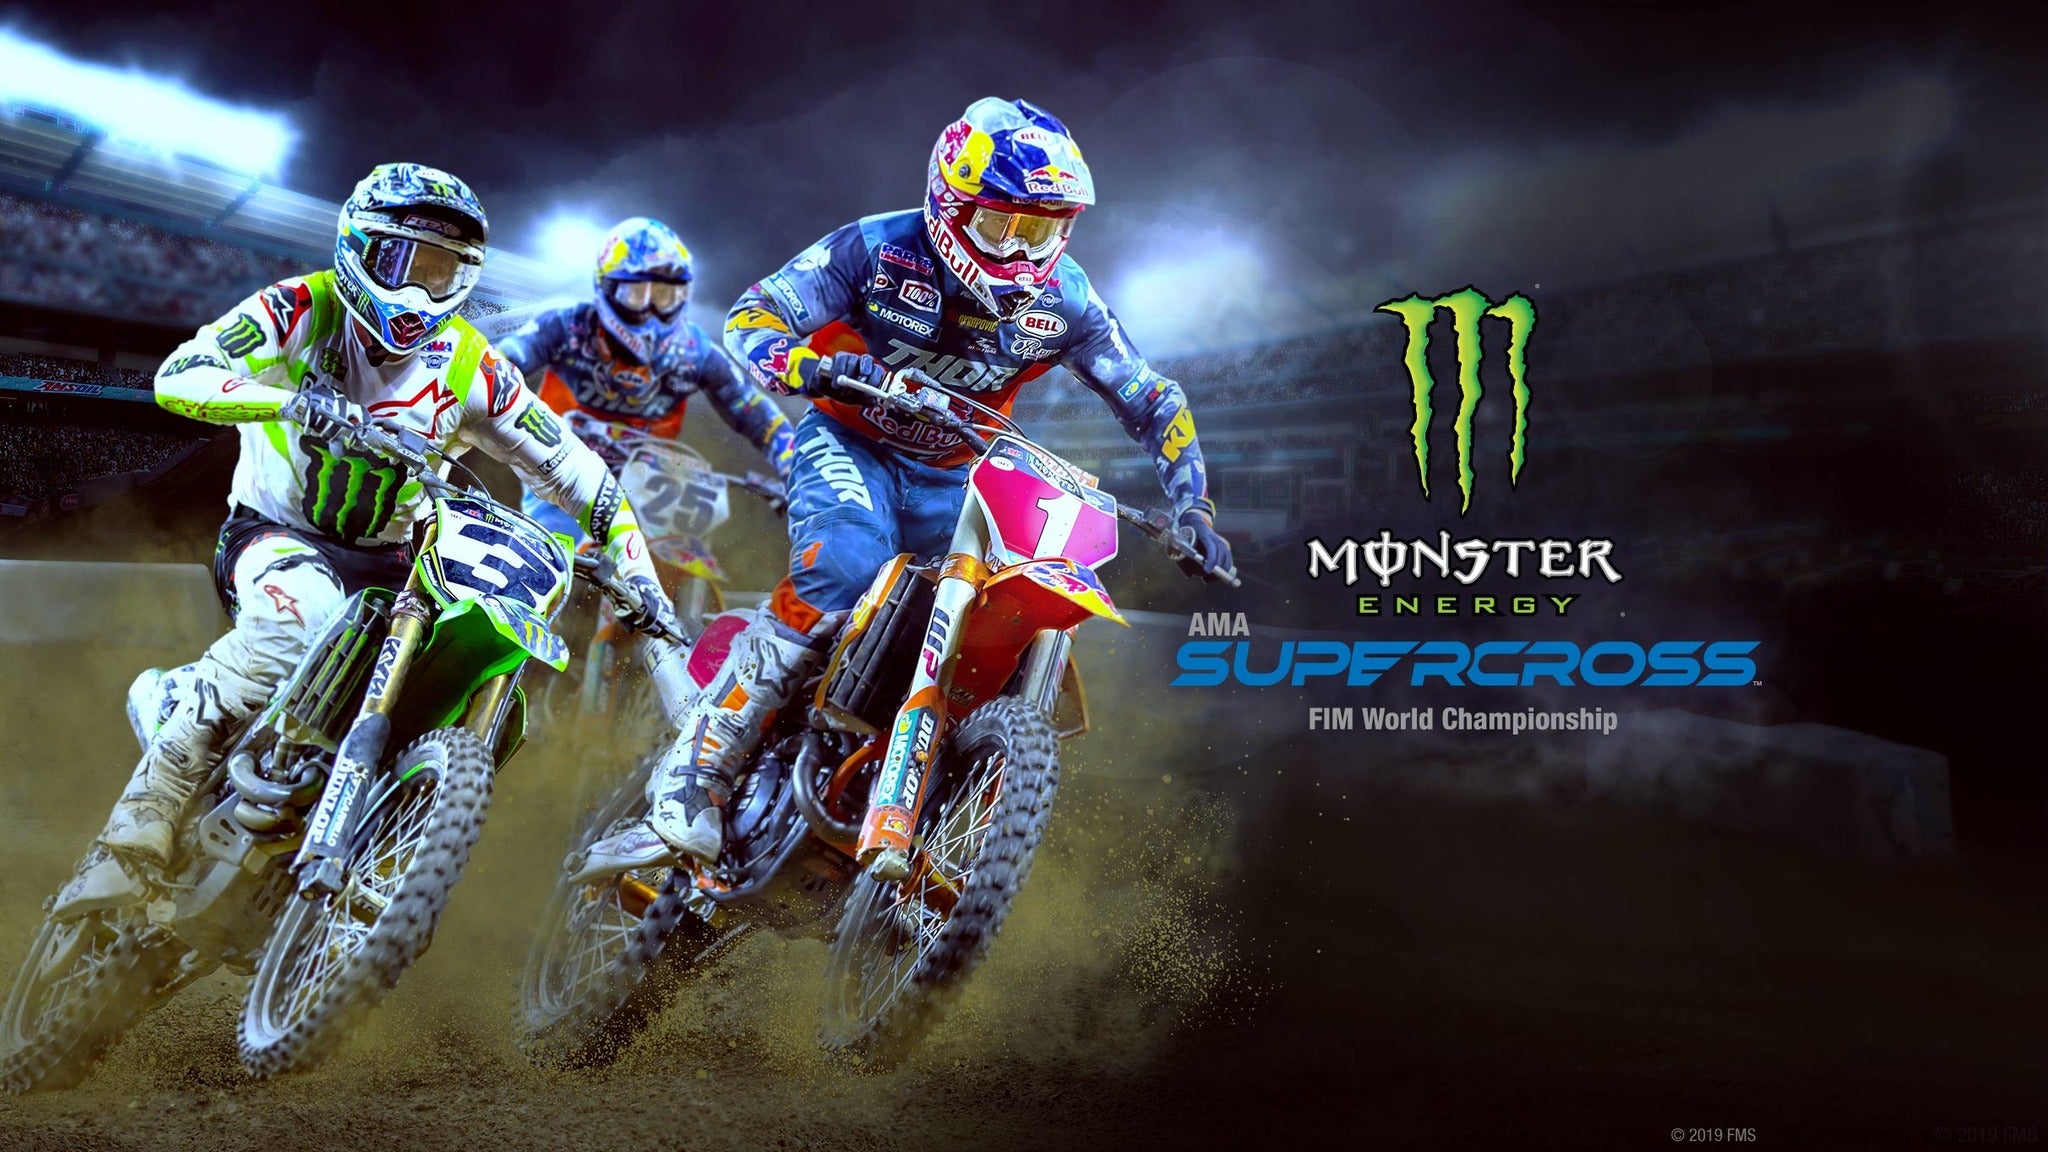 Monster Energy Supercross in Indianapolis promo photo for Advertised TM / Venue presale offer code